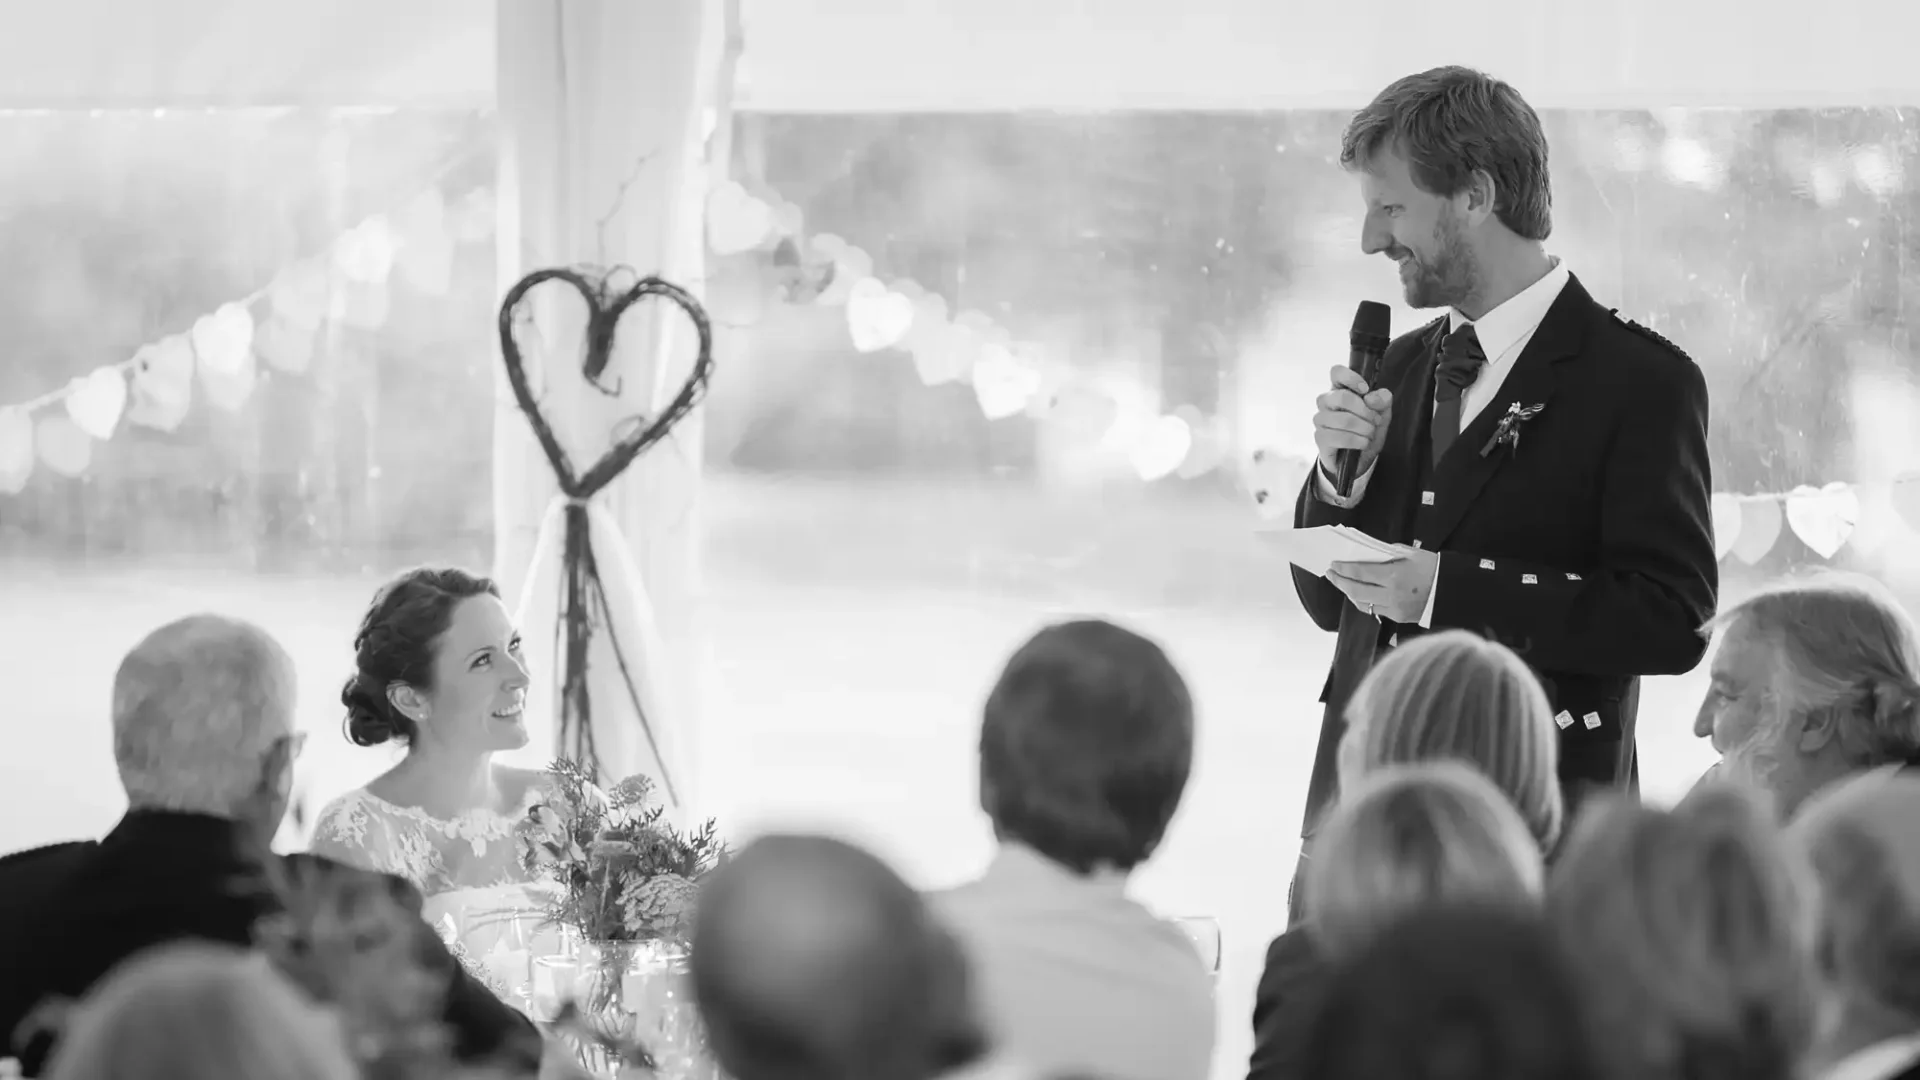 A man in a suit gives a speech at a wedding, holding a microphone and paper, facing a smiling bride seated among guests in a tent with string lights.